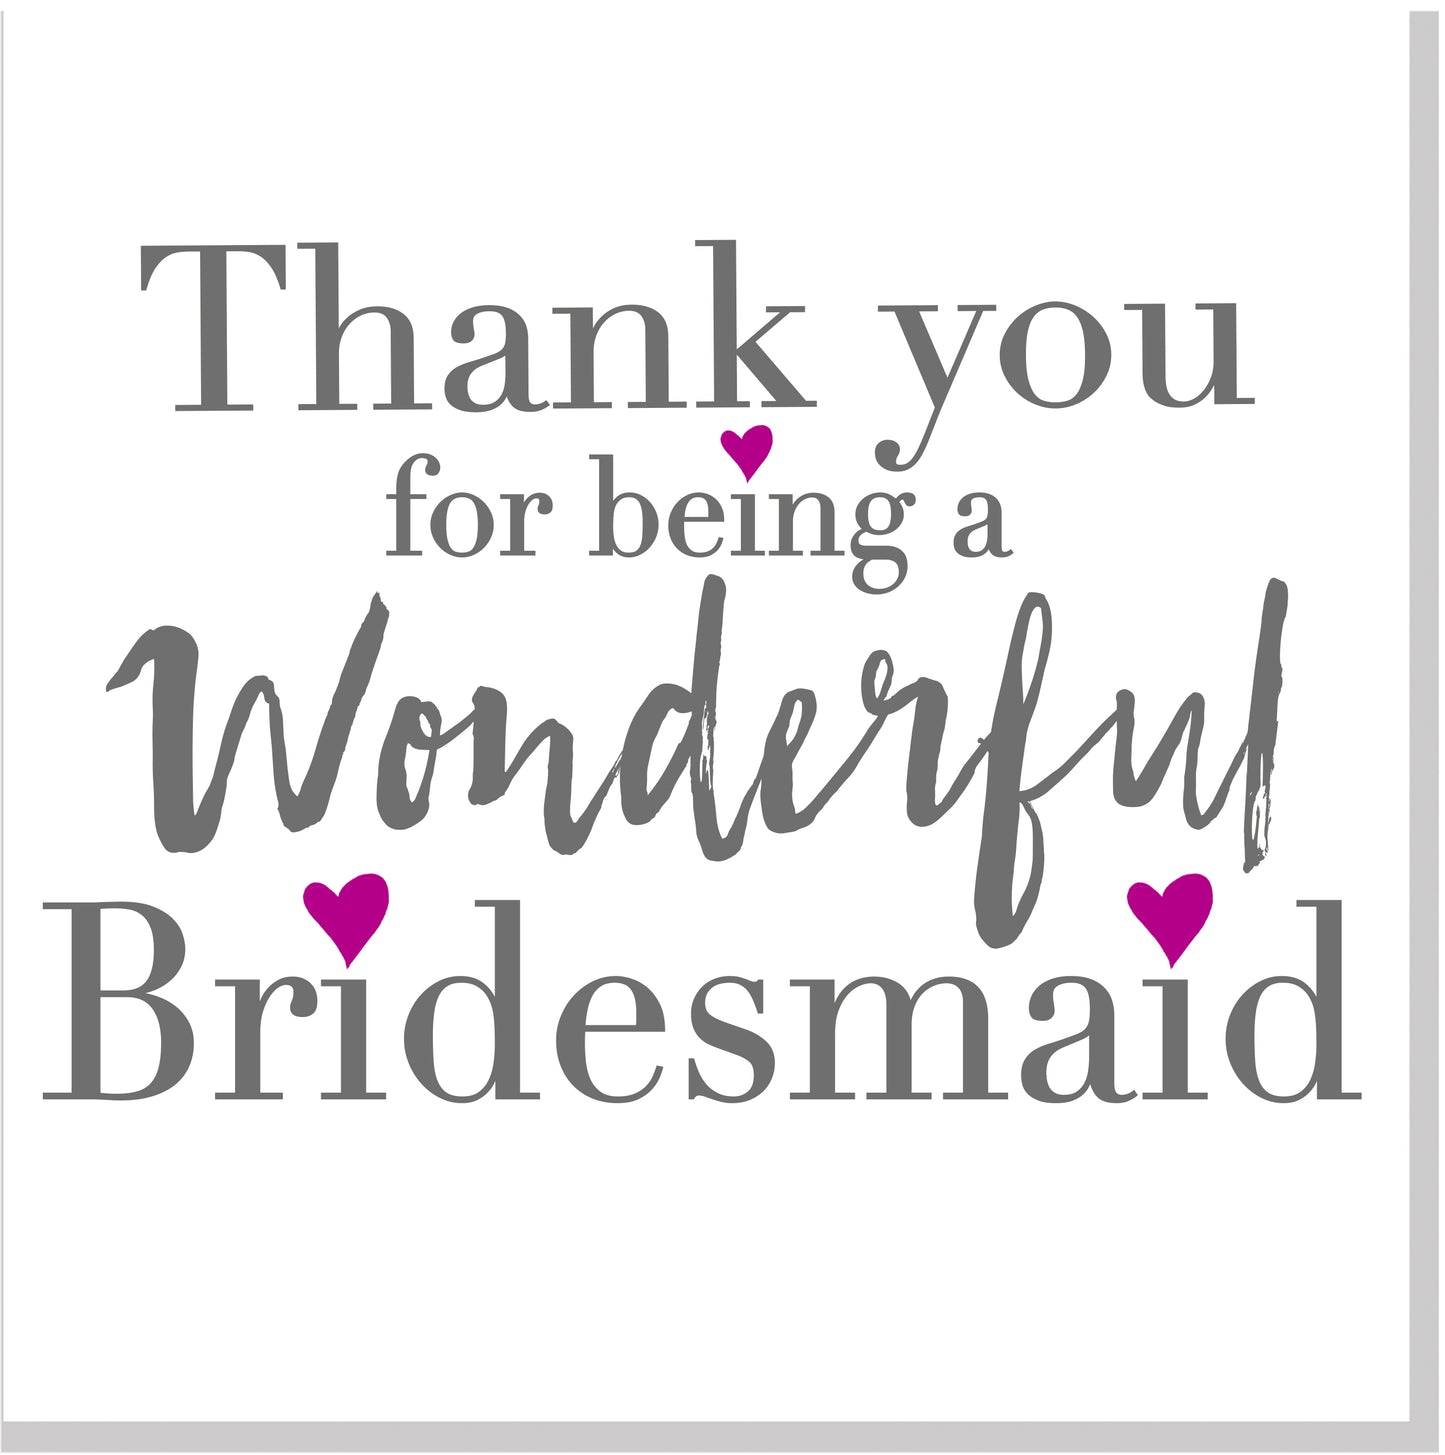 Thank you for being my bridesmaid square card